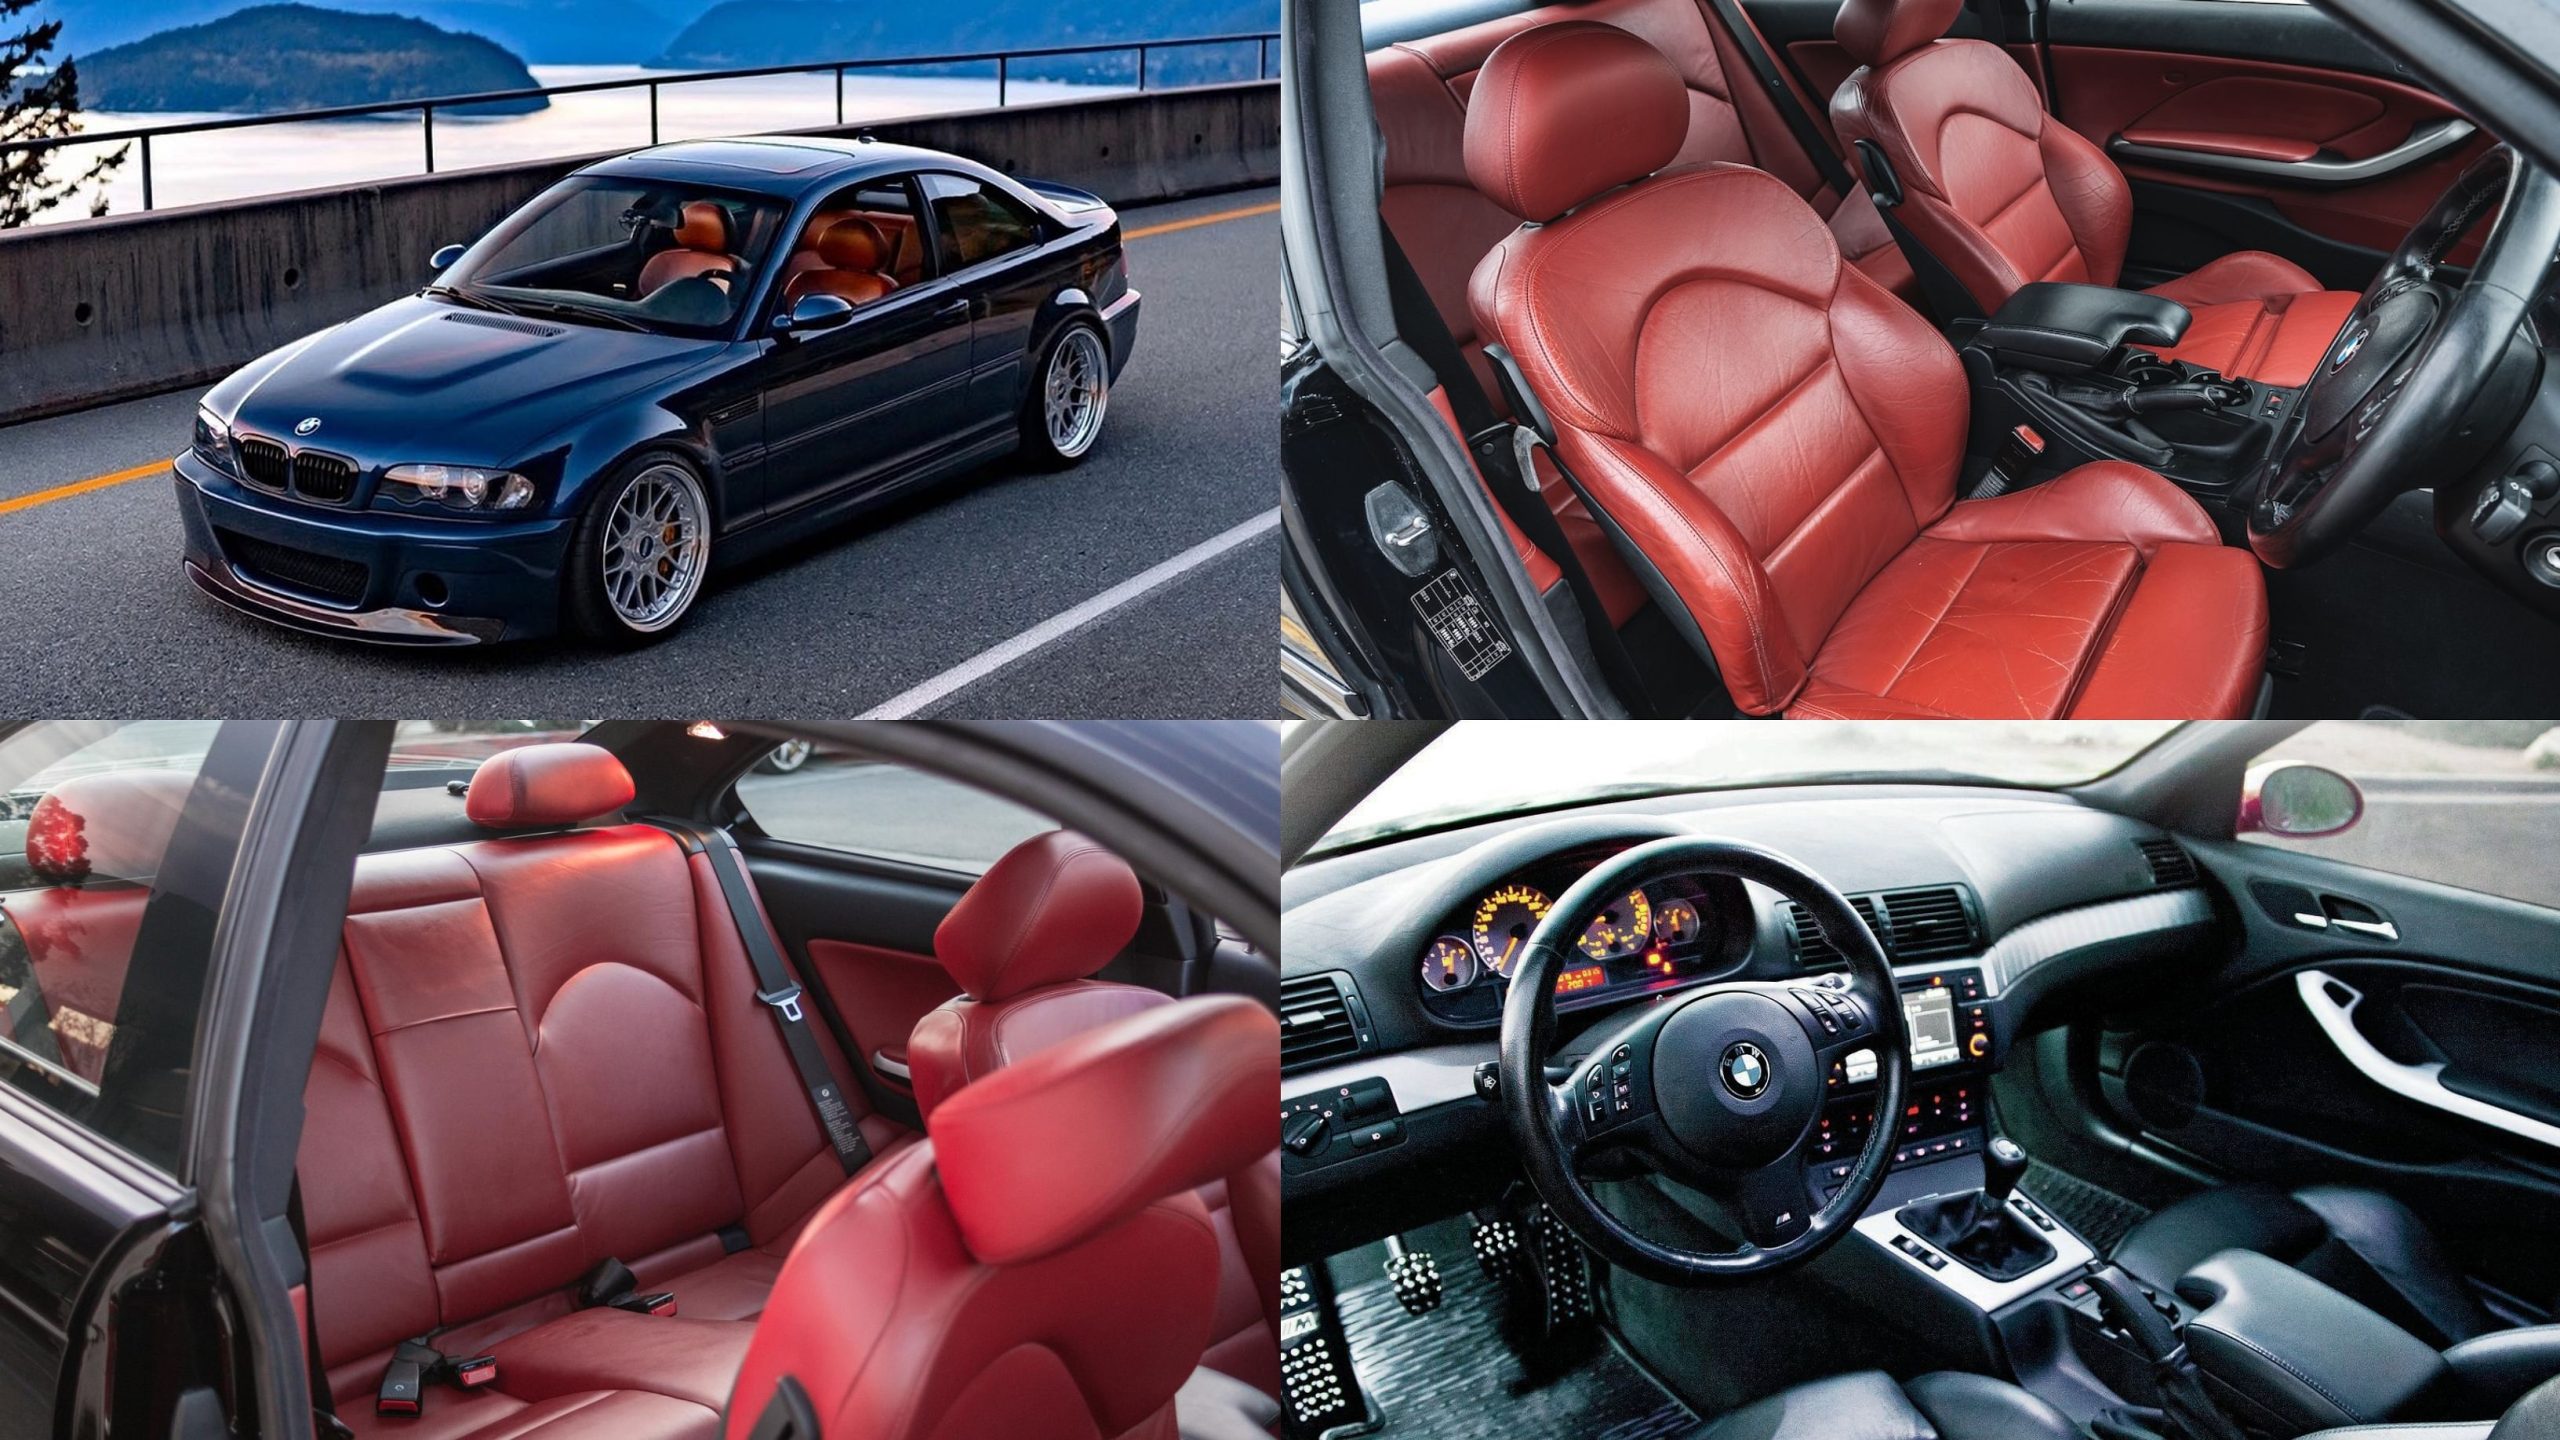 BMW E46 M3 - interior, front and rear seats, dashboard, steering